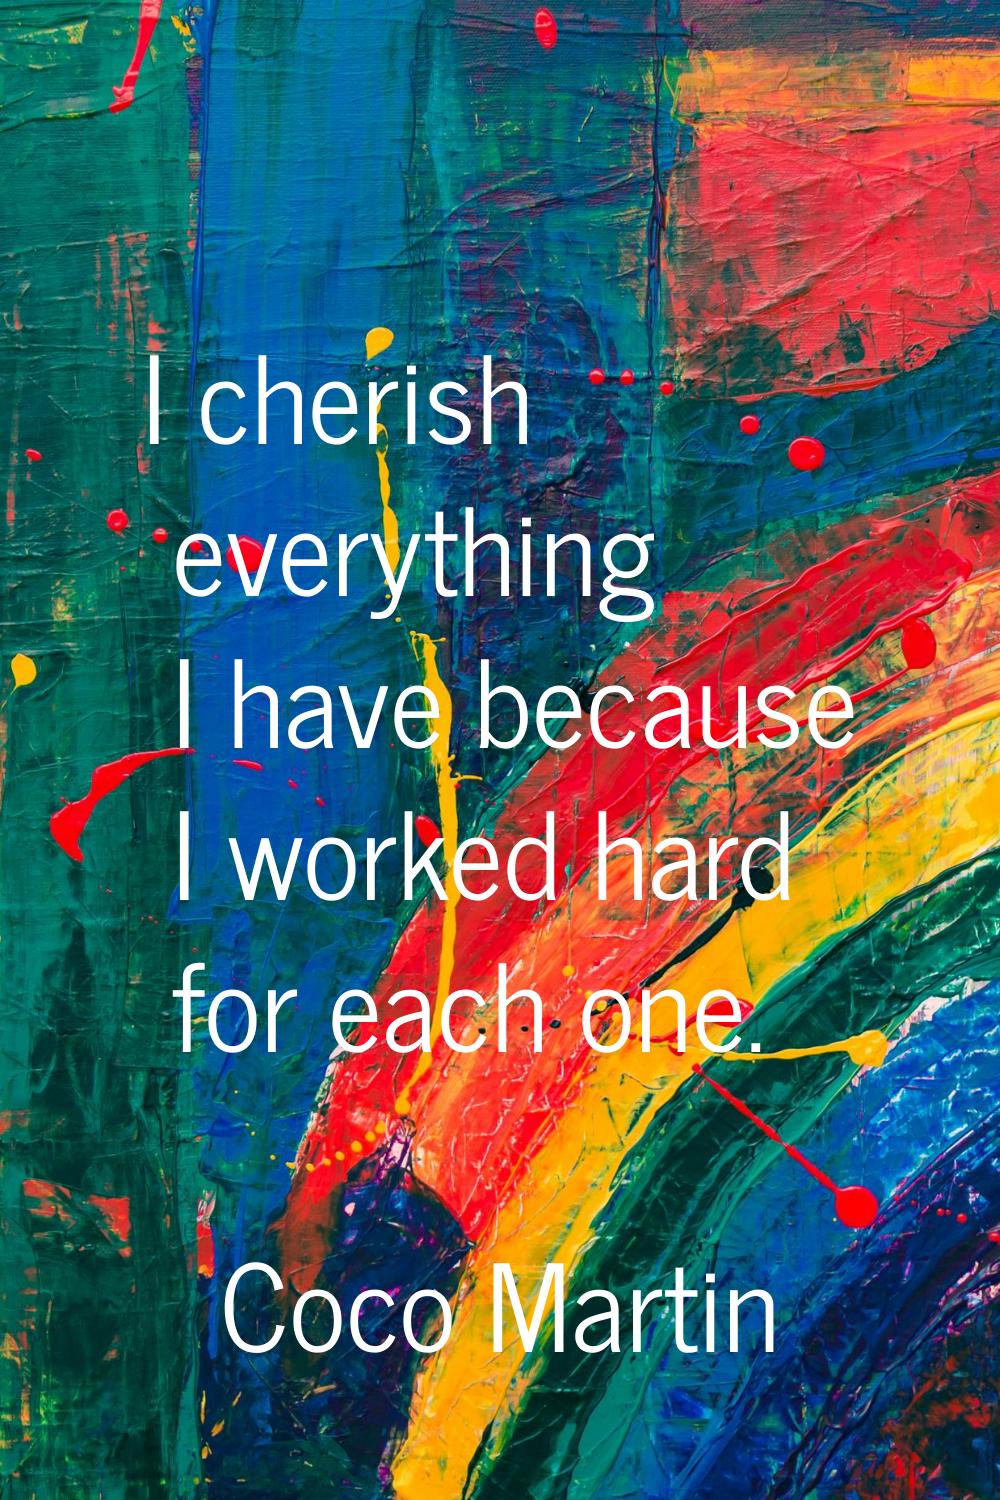 I cherish everything I have because I worked hard for each one.